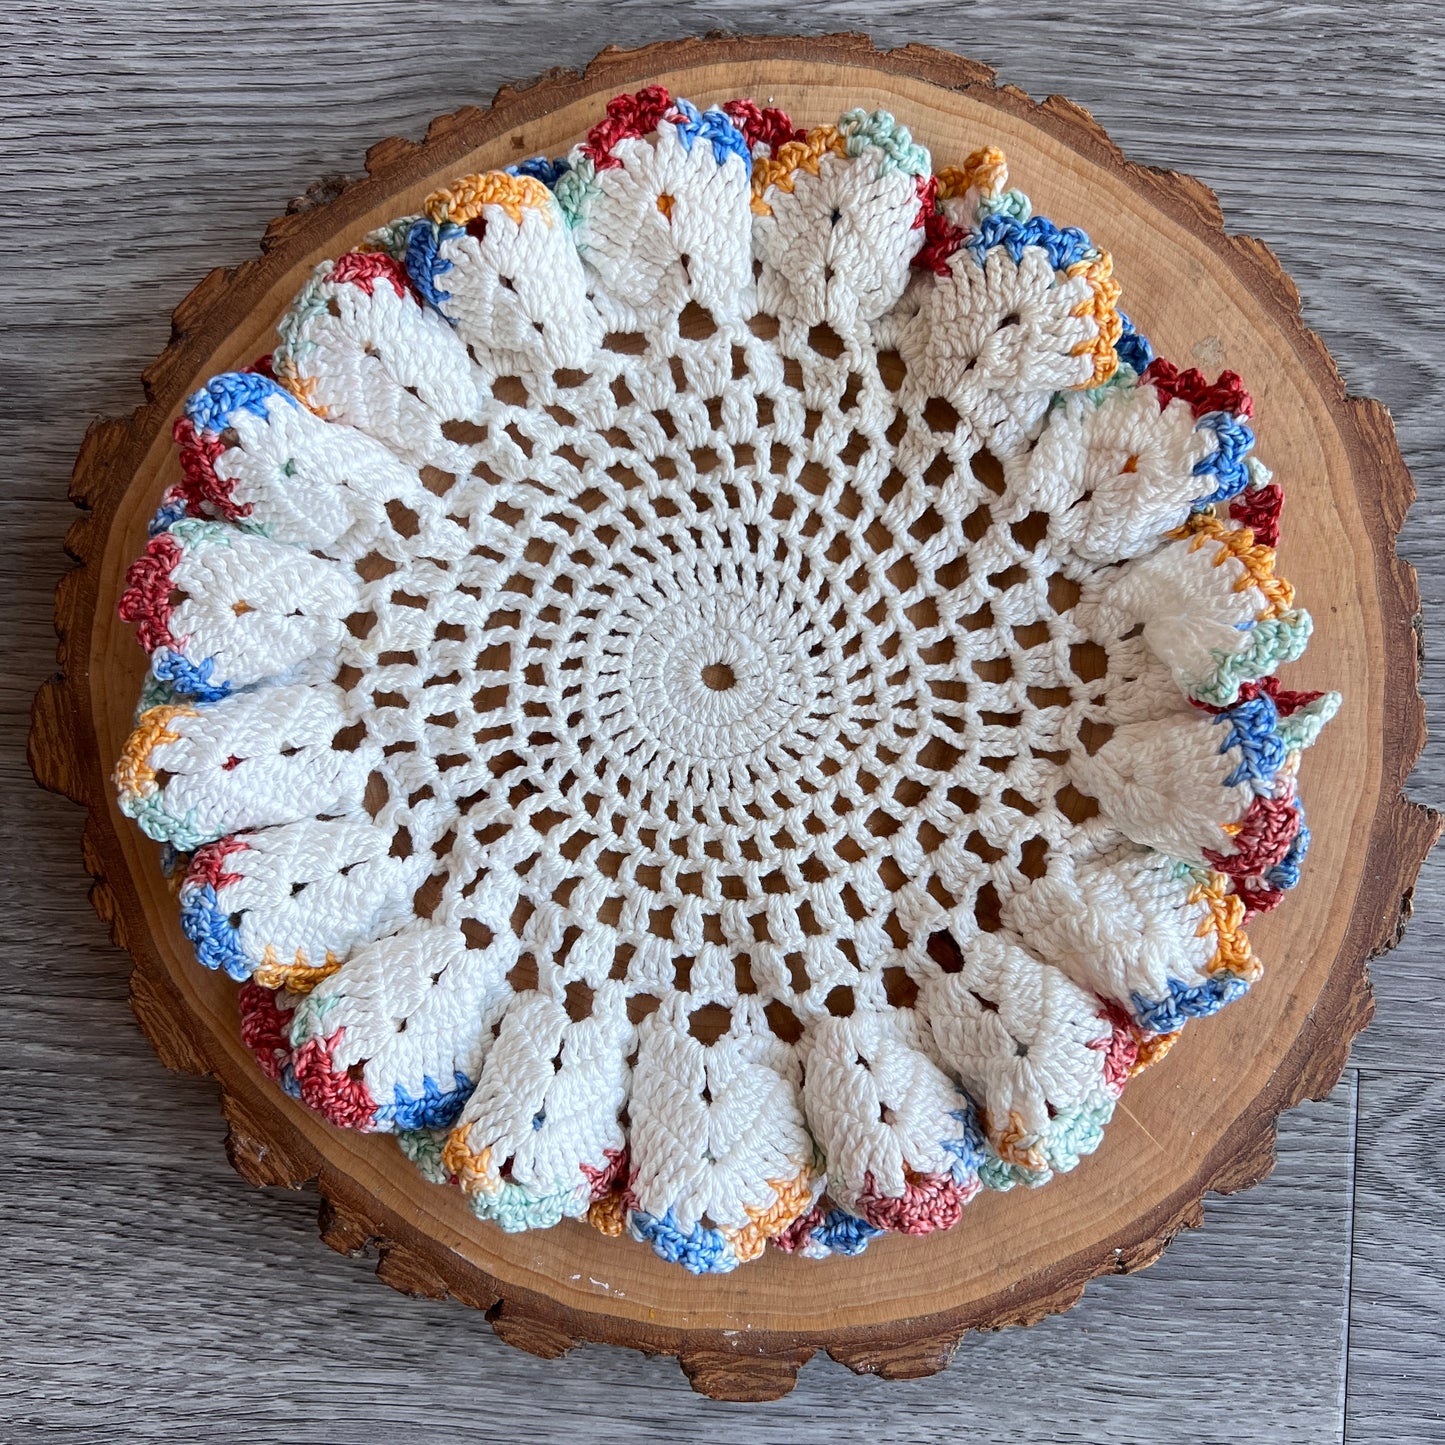 Vintage Crocheted Doily